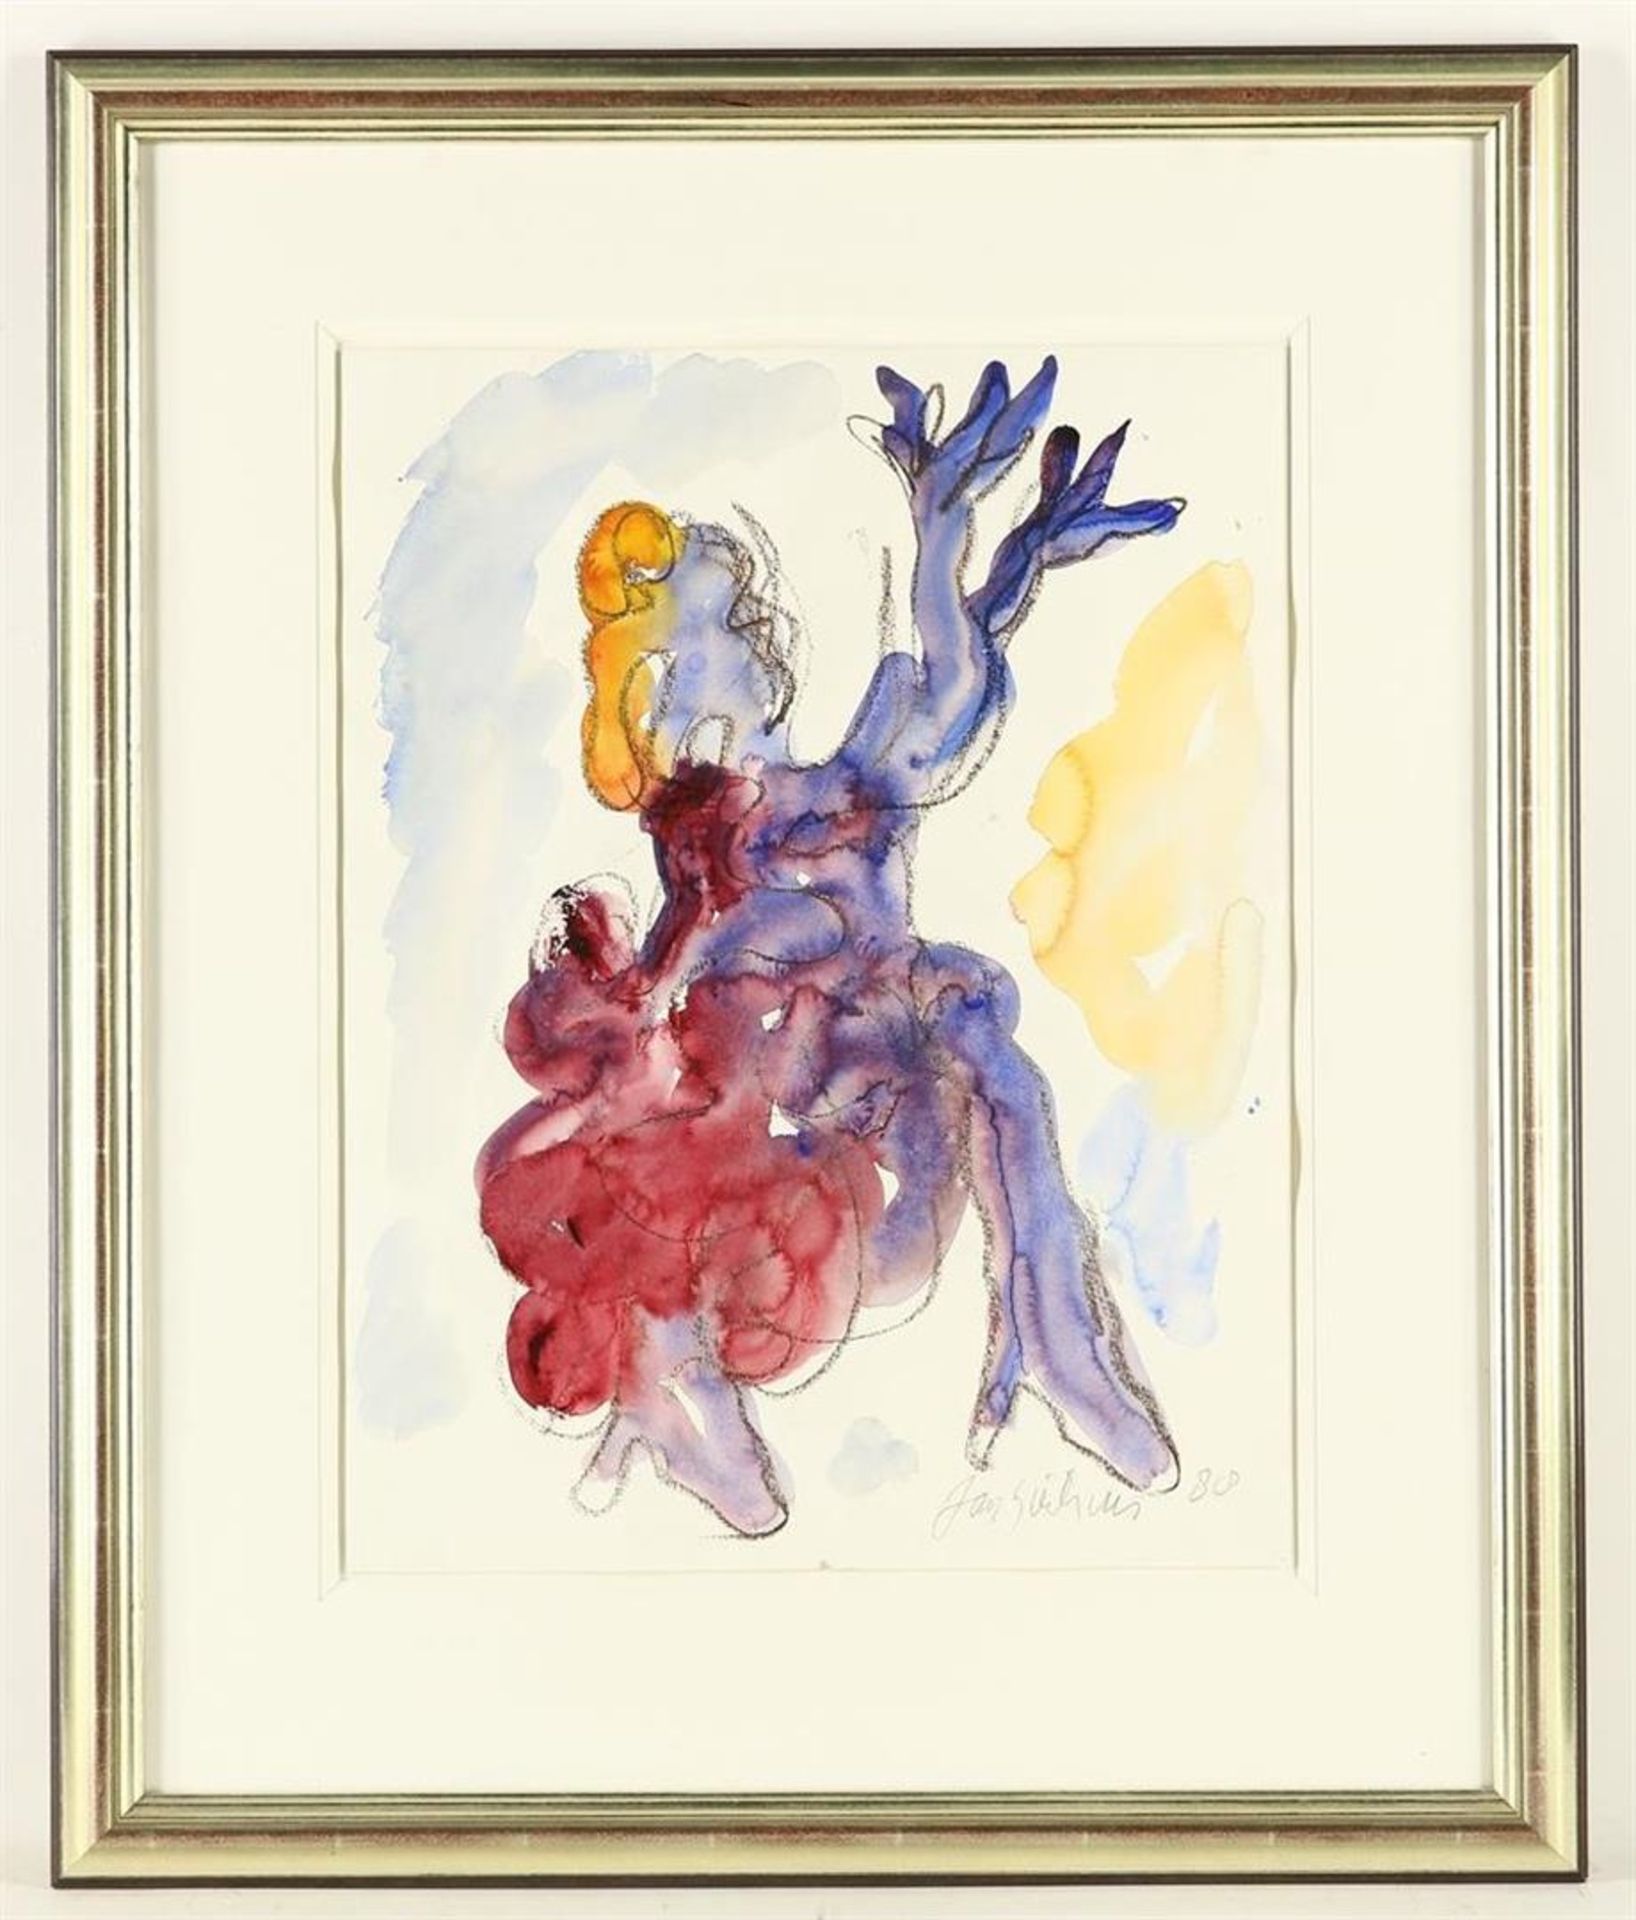 Jan Sierhuis (1928-2023) Flamenco dancer, signed lower right and dated '88, watercolor 65 x 50 cm. - Image 2 of 4